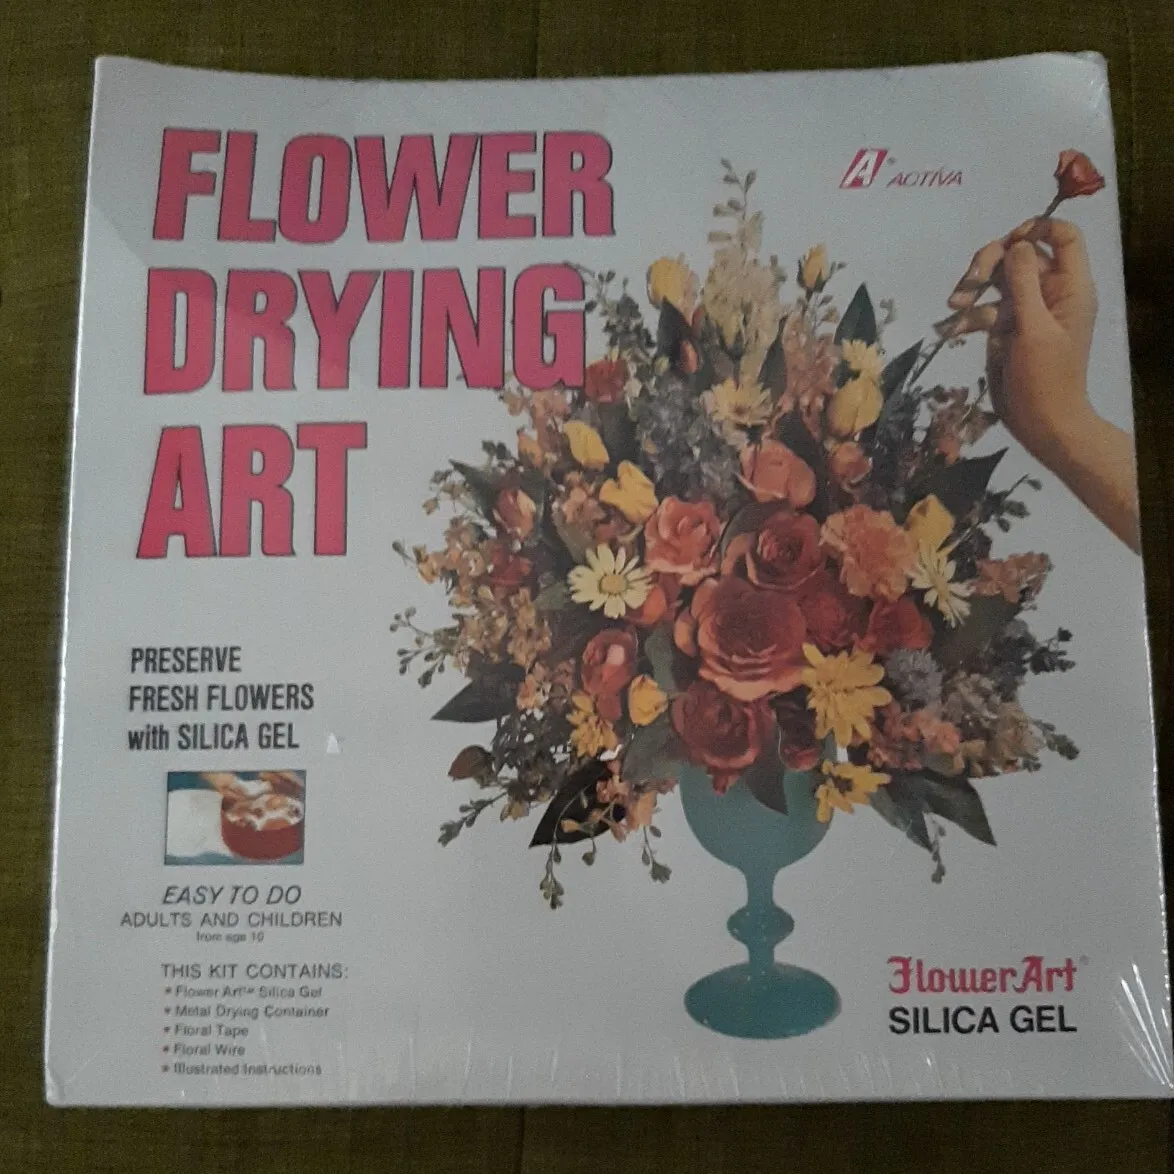 VINTAGE 1973 FLOWER DRYING ART BOXED KIT SEALED by ACTIVA * SILICA GEL *  CRAFTS